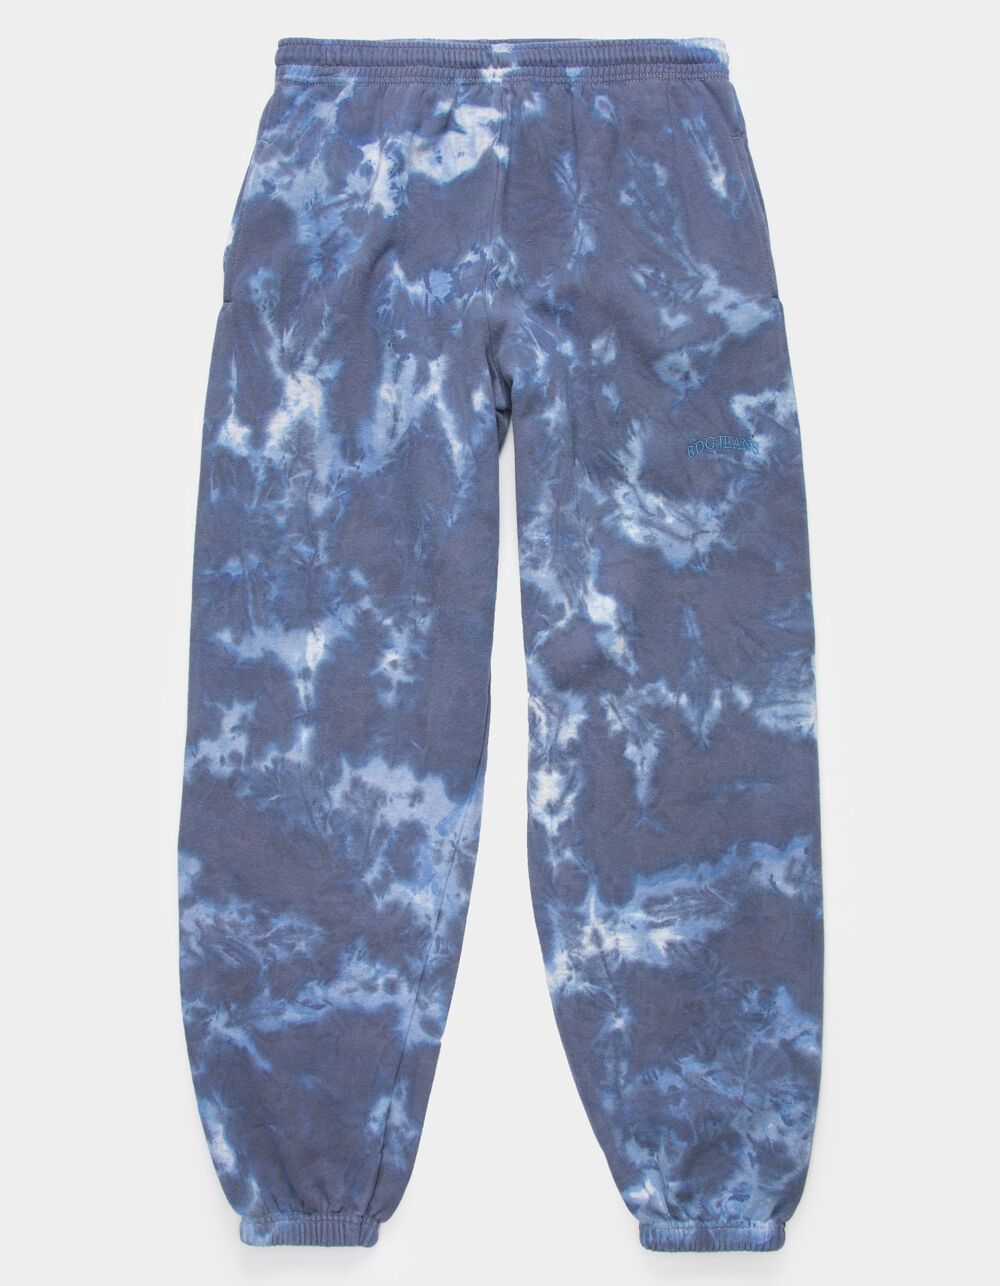 BDG Urban Outfitters Tie Dye Mens Jogger Pants - BLUE COMBO | Tillys